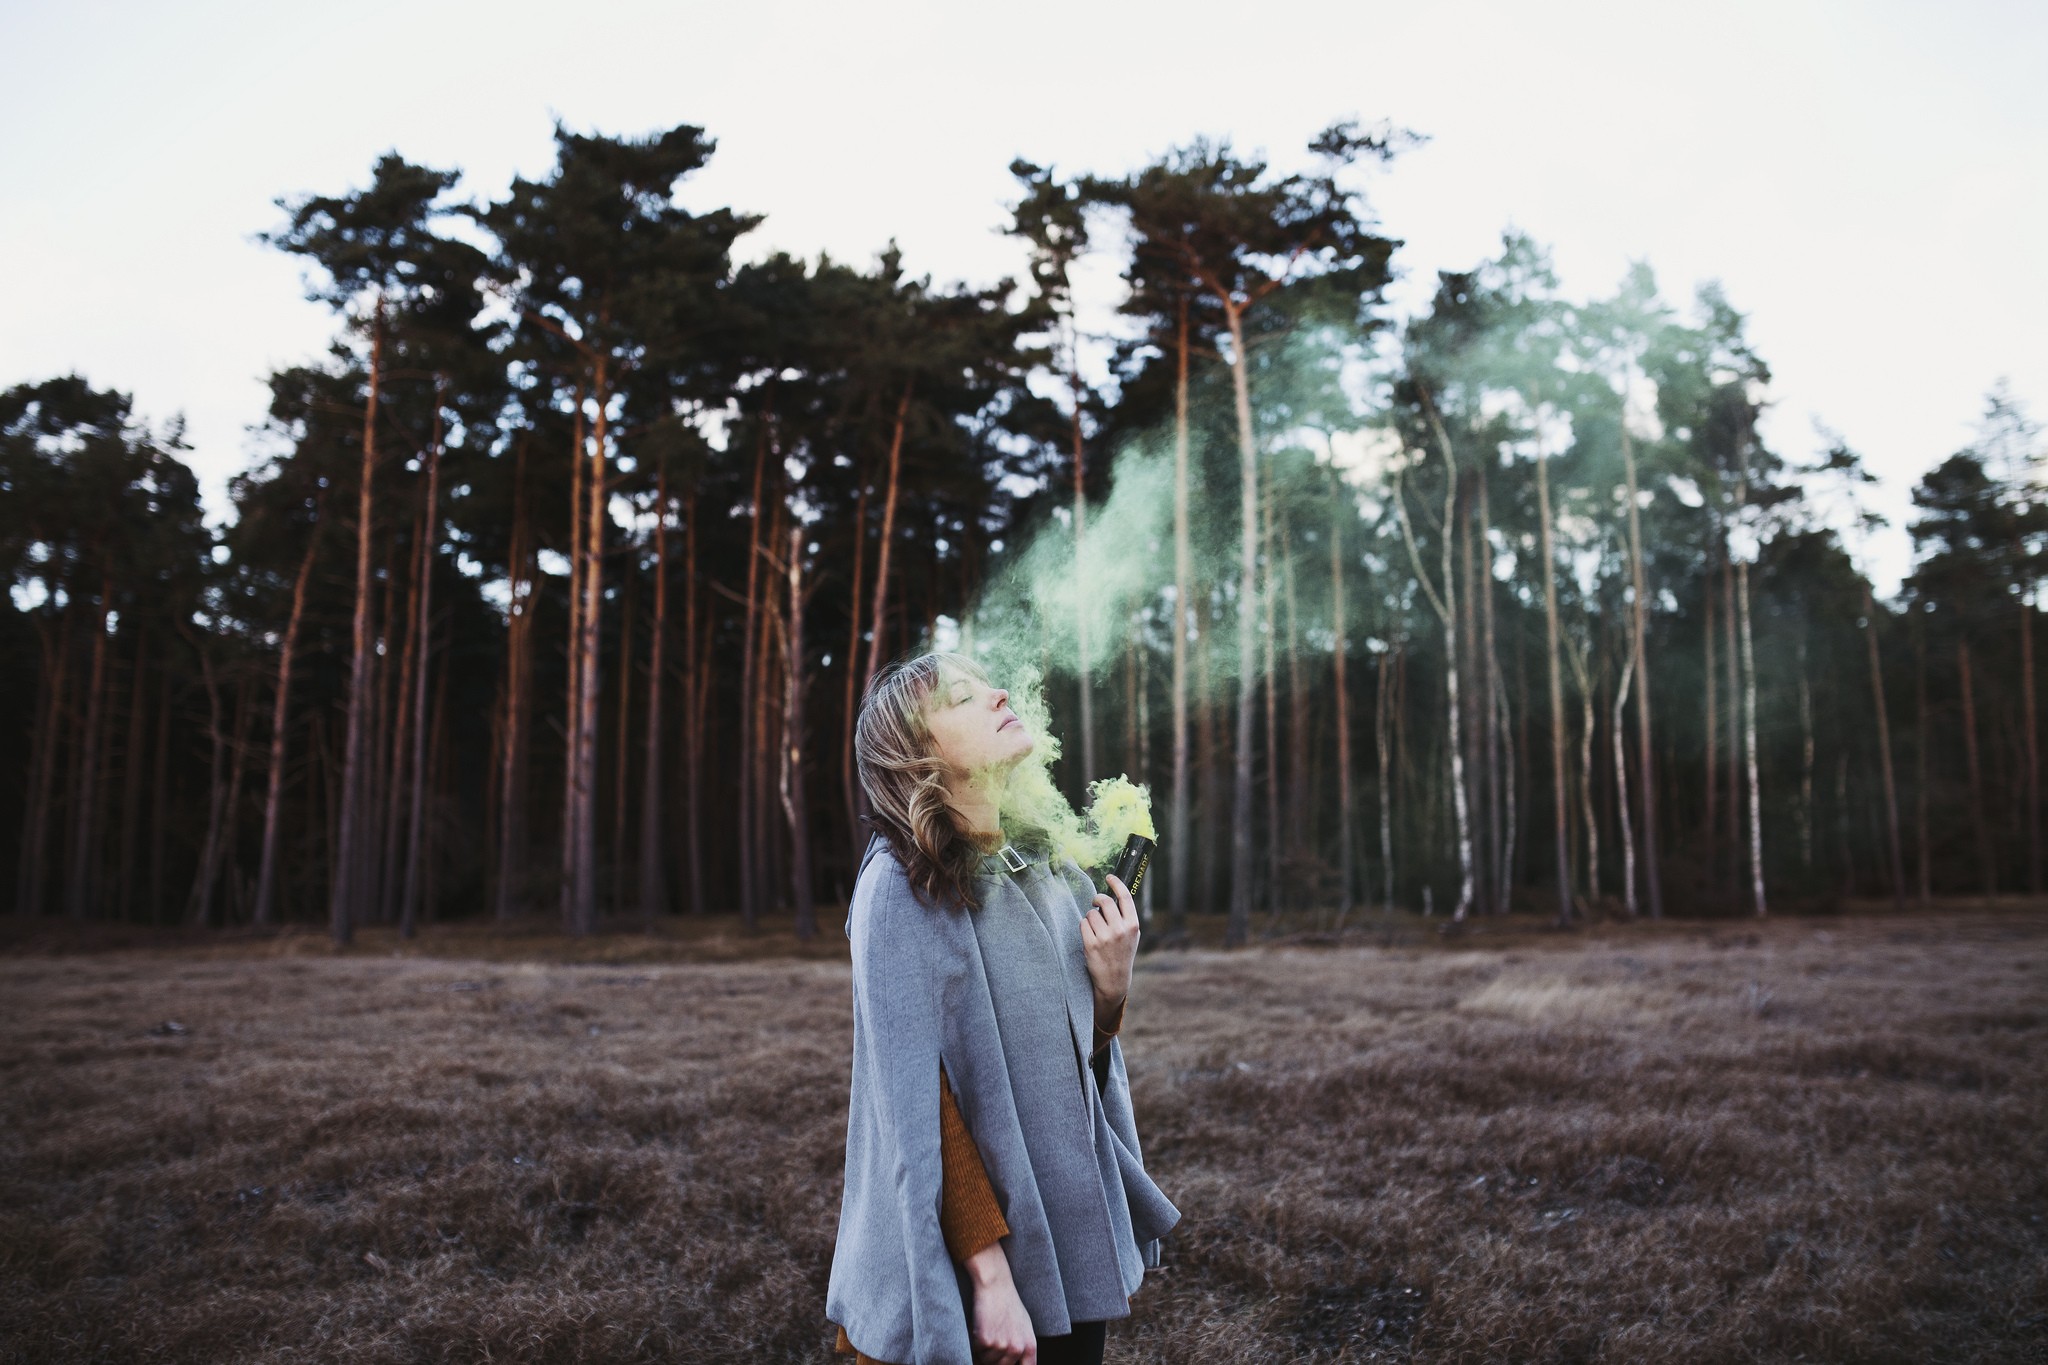 People 2048x1365 women brunette colored smoke ponchos closed eyes women outdoors trees standing outdoors smoke